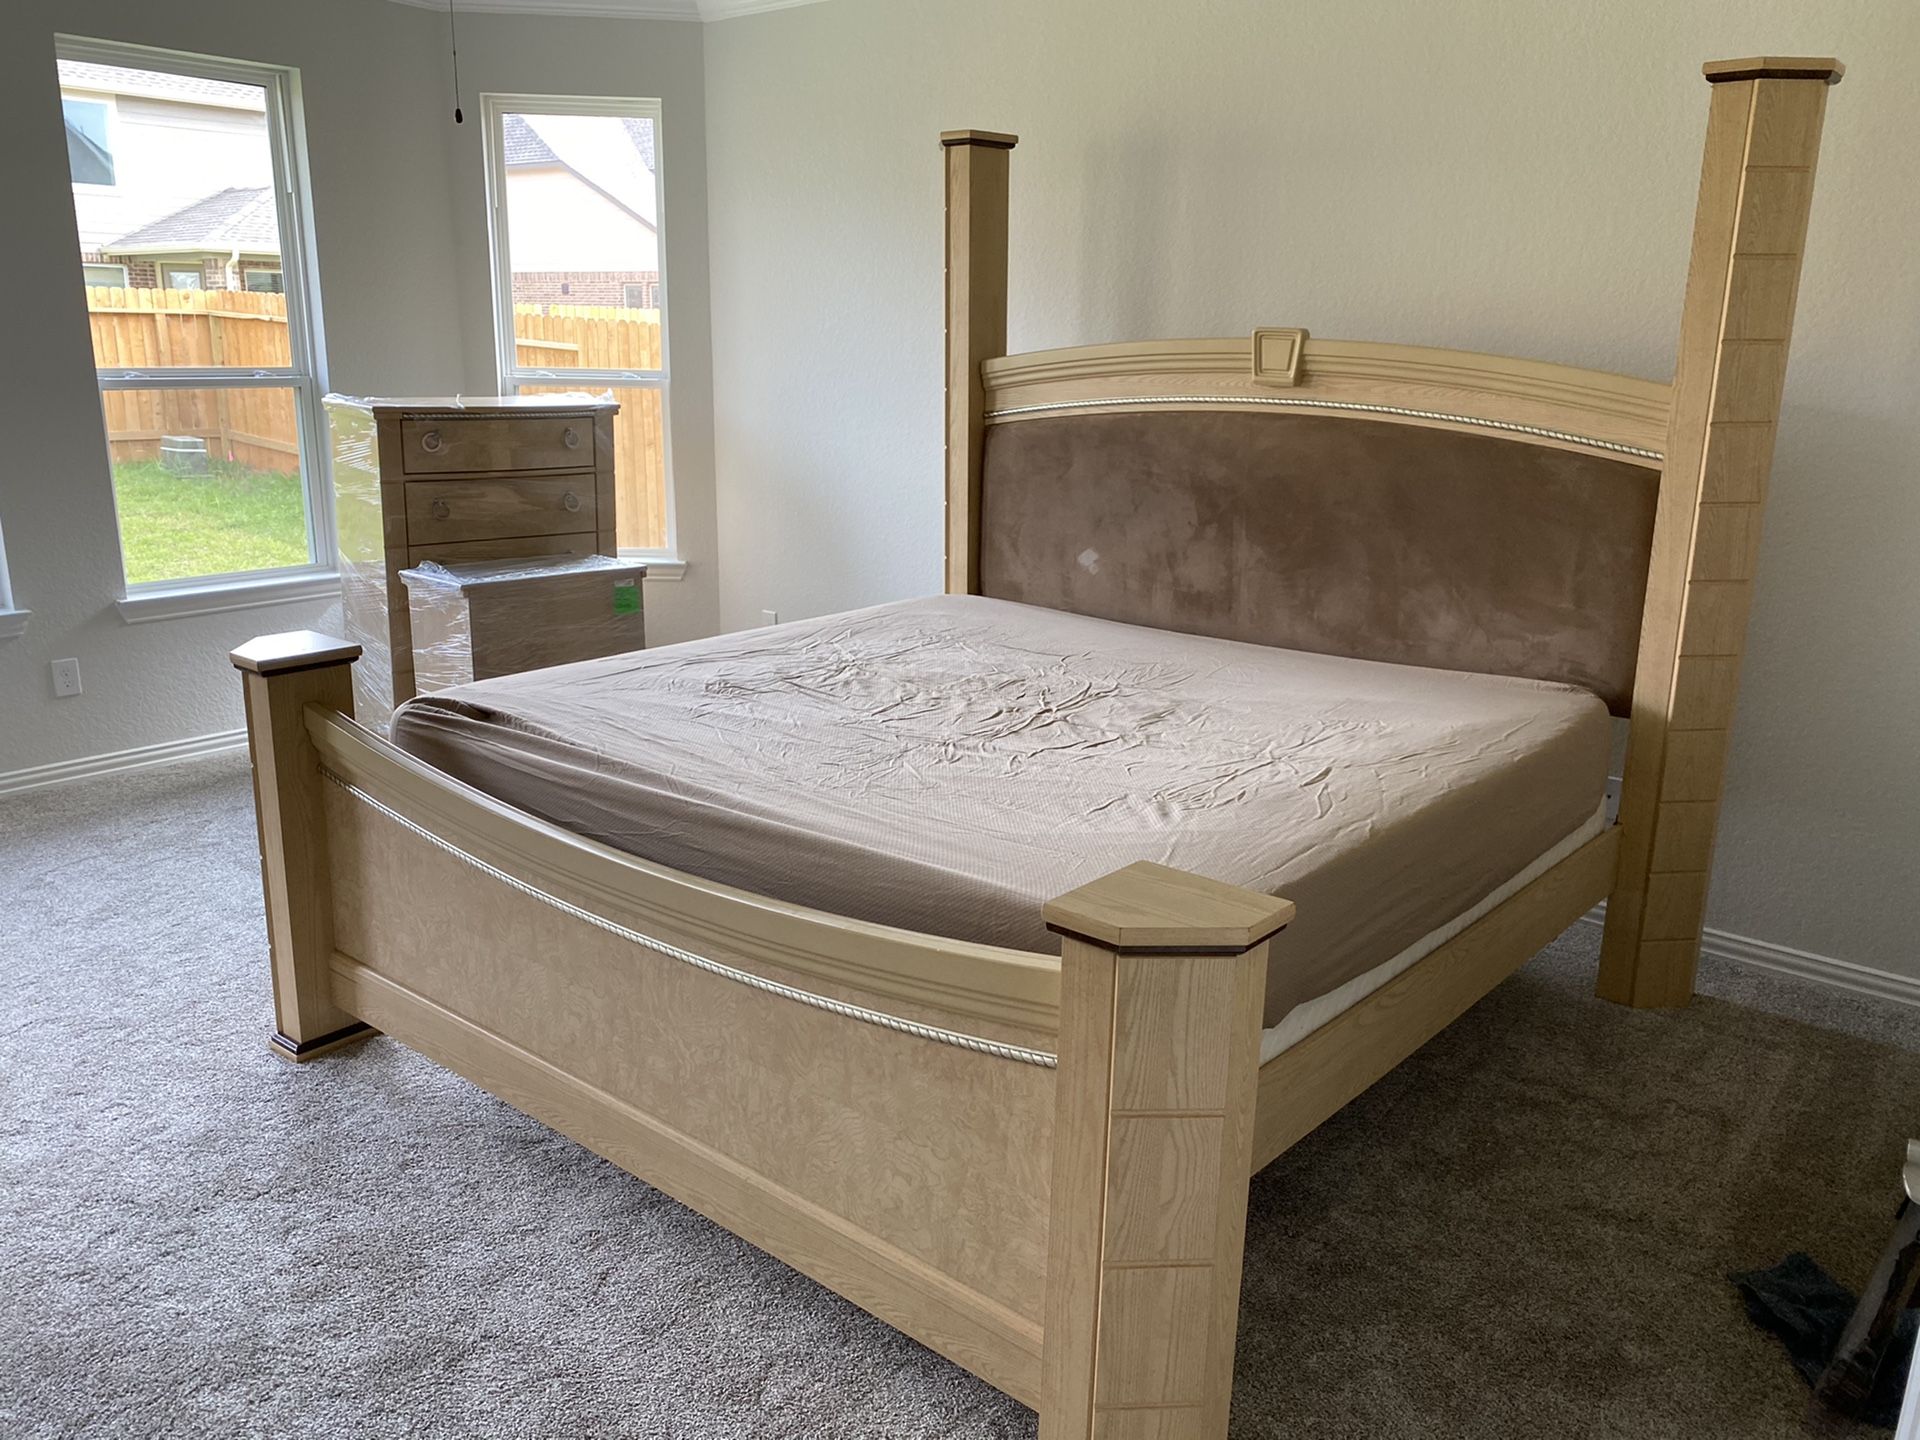 King size bedroom set with mattress and box spring